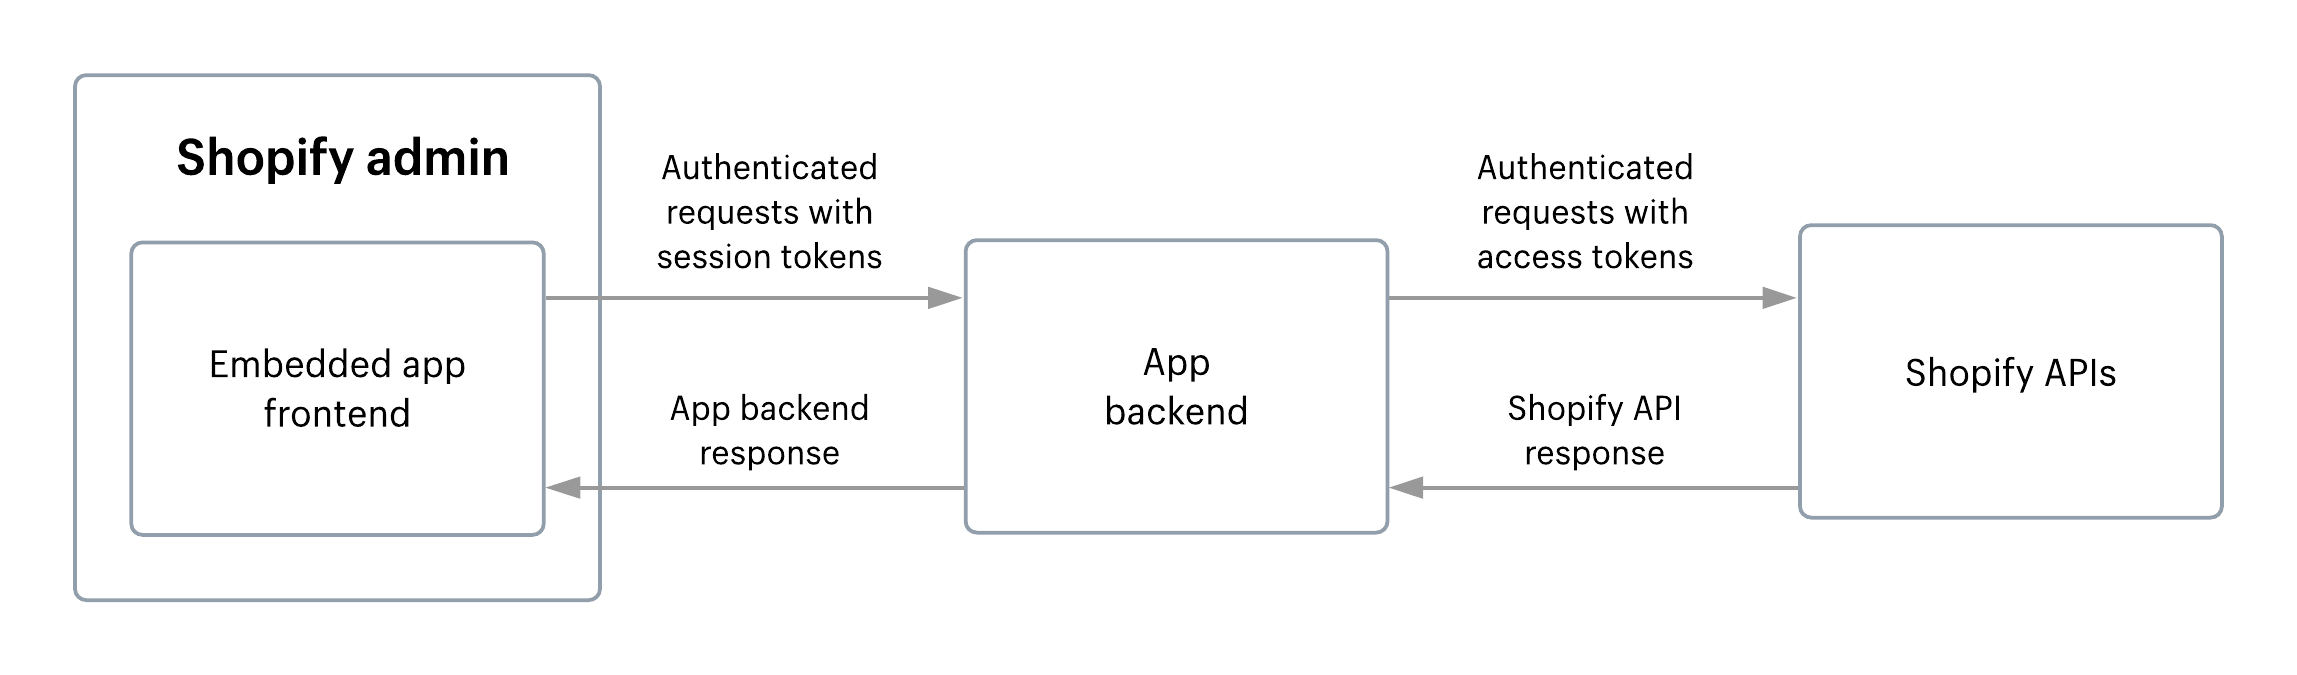 Diagram showing authentication process using sessions tokens and API access tokens